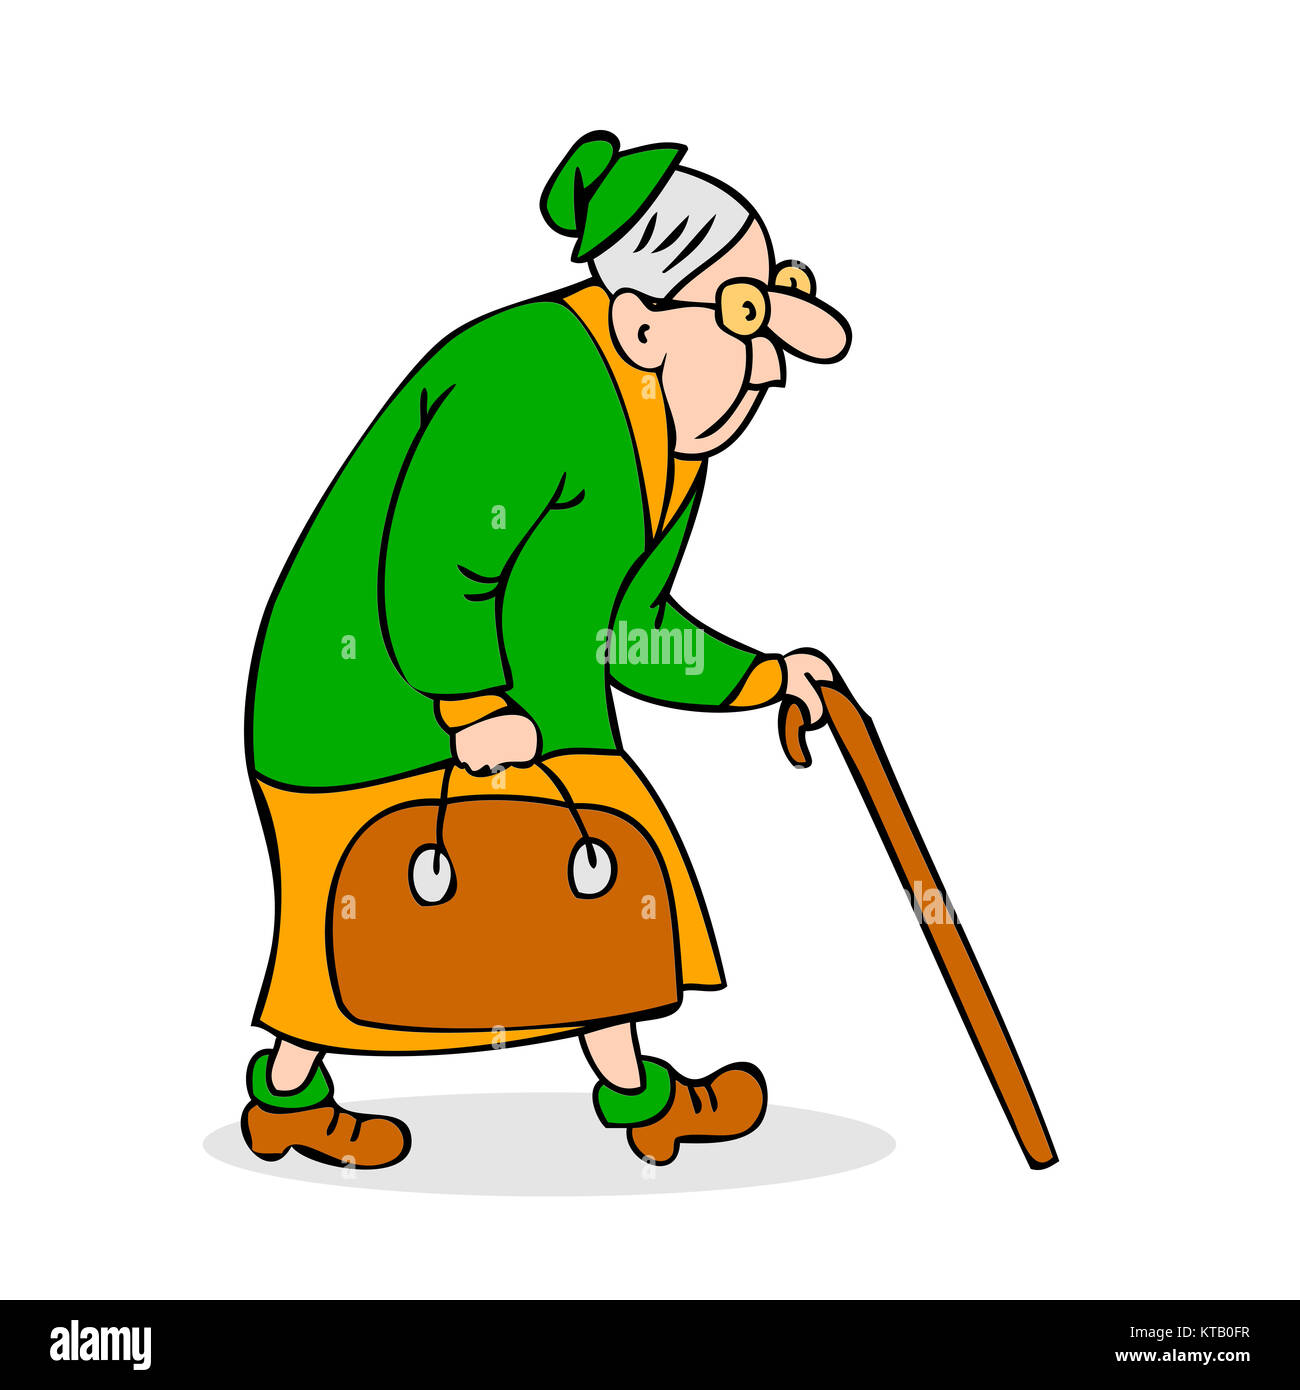 Old woman with cane and a bag. Grandmother with glasses walking. Hunched elderly lady with a cane. Colorful cartoon vector illustration on white background Stock Photo